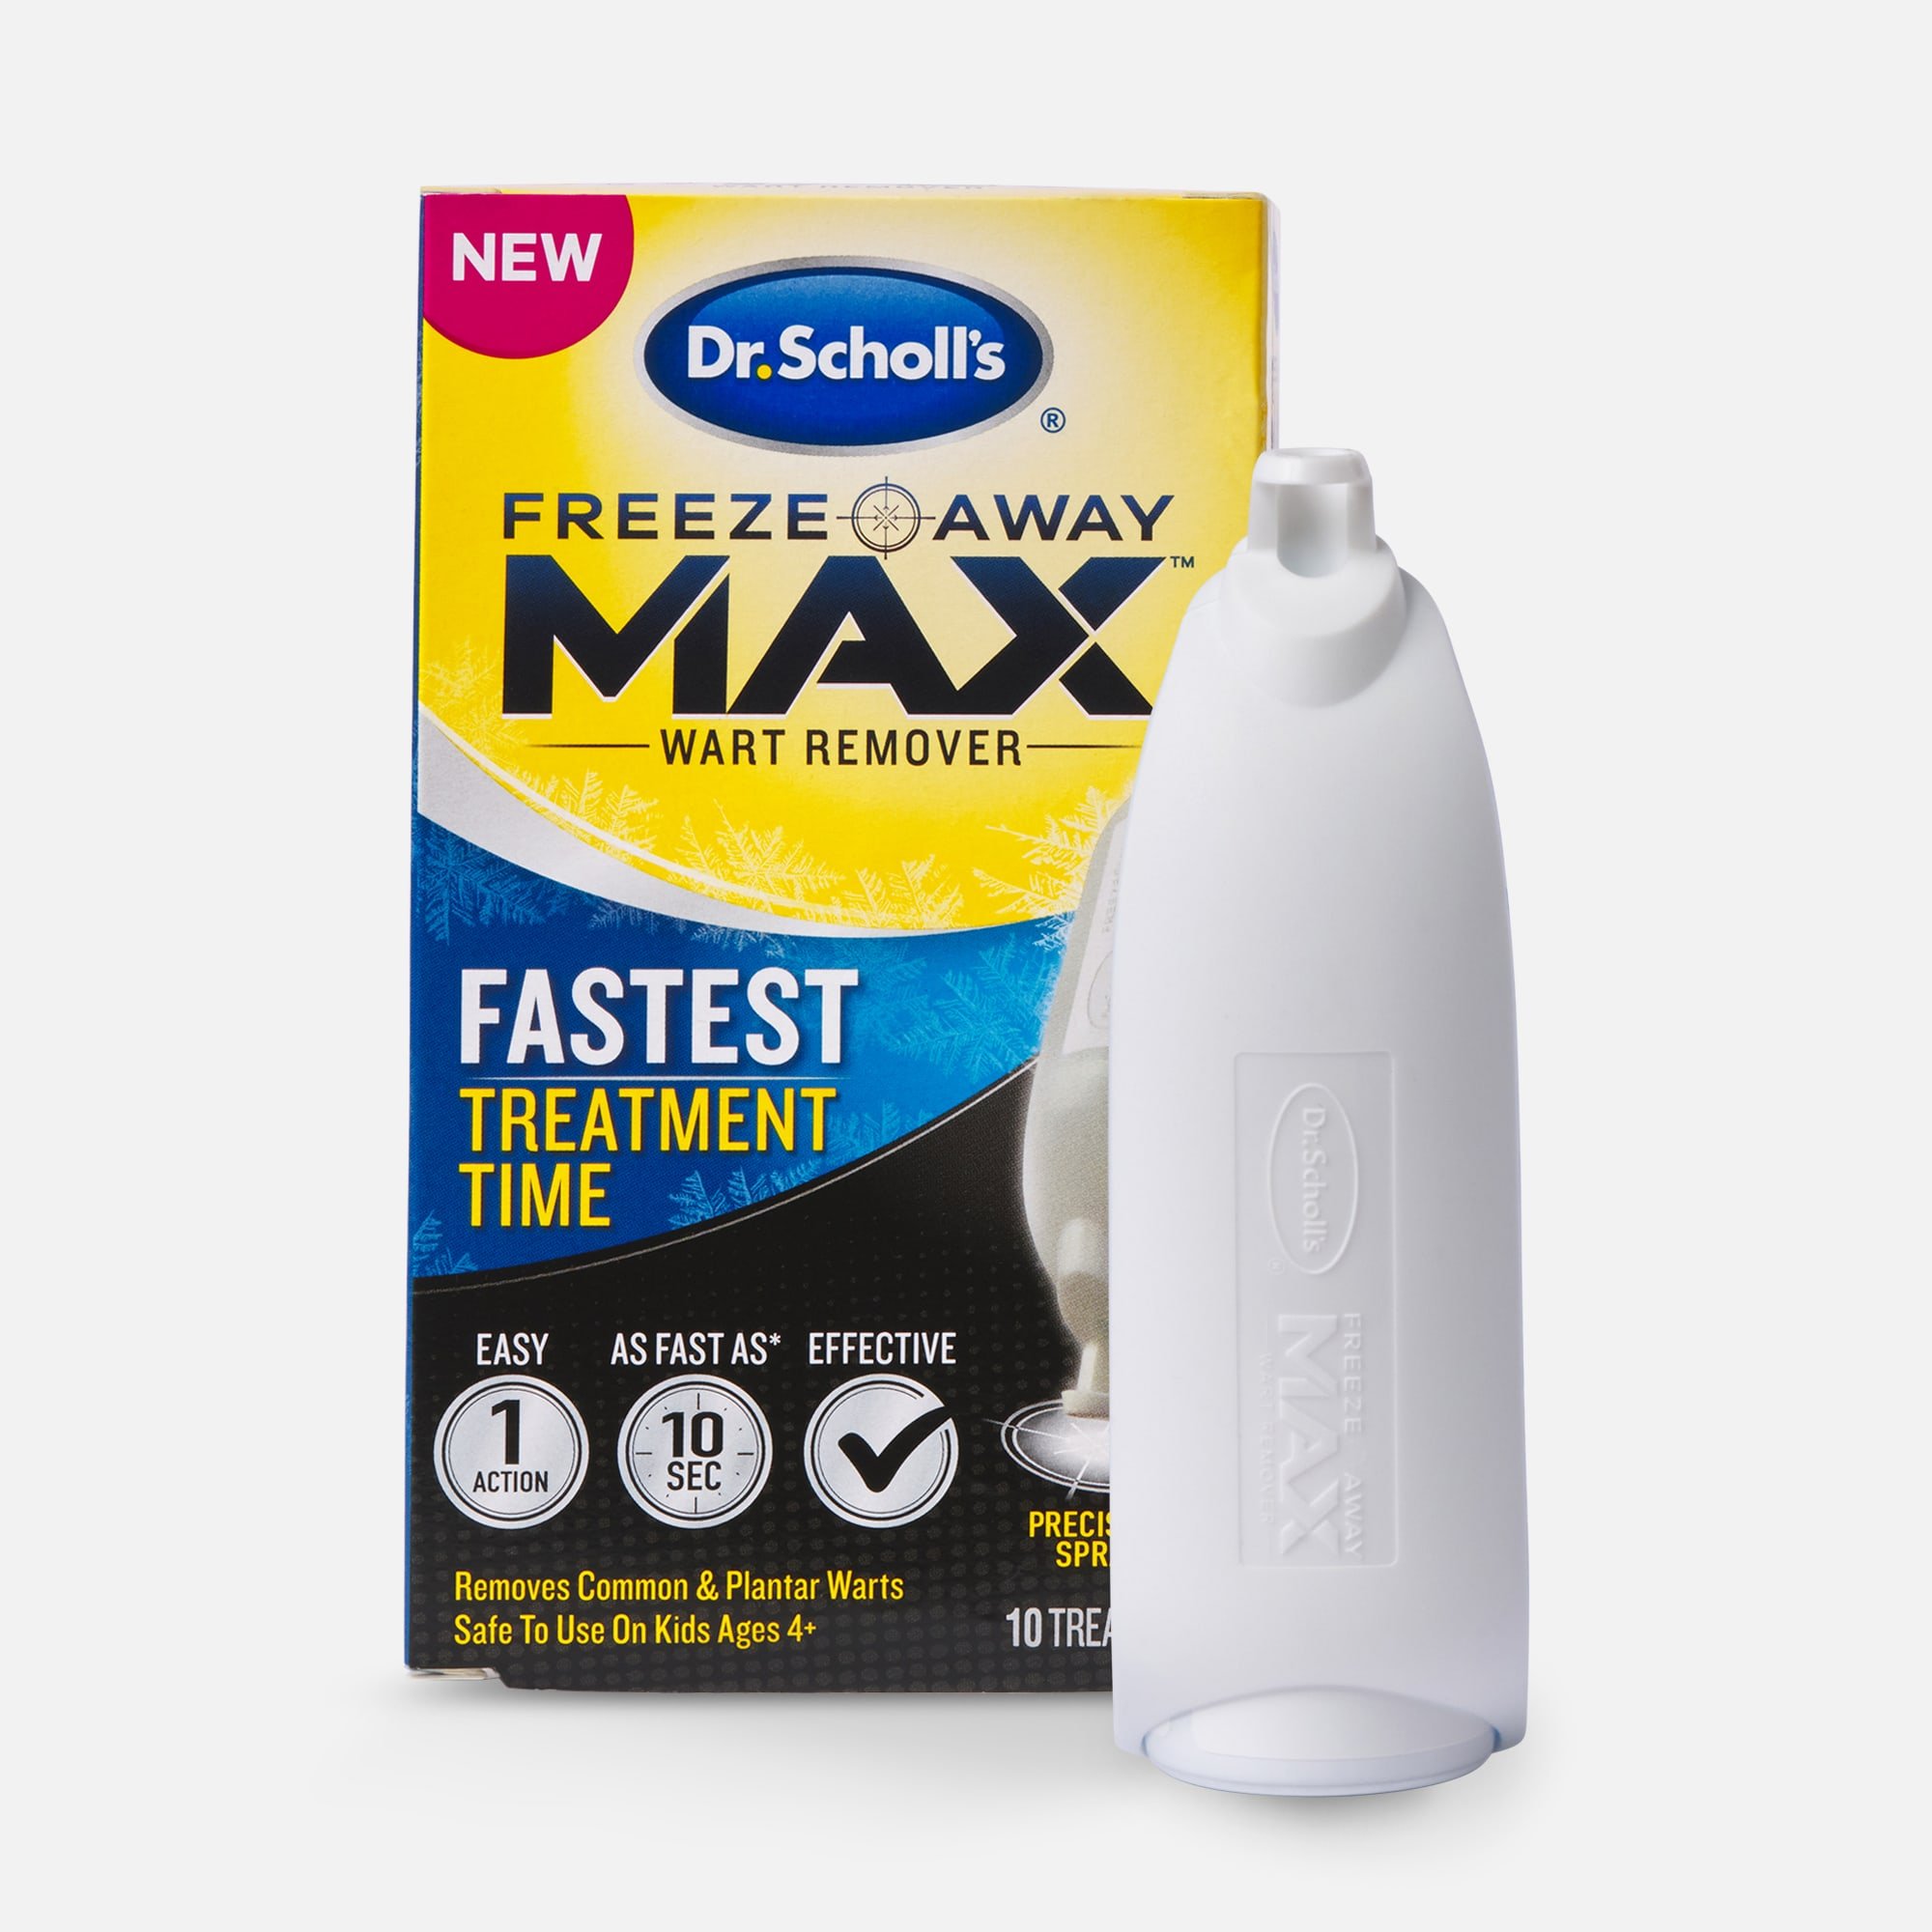 Dr. Scholl's Freeze Away® Skin Tag Remover, skin